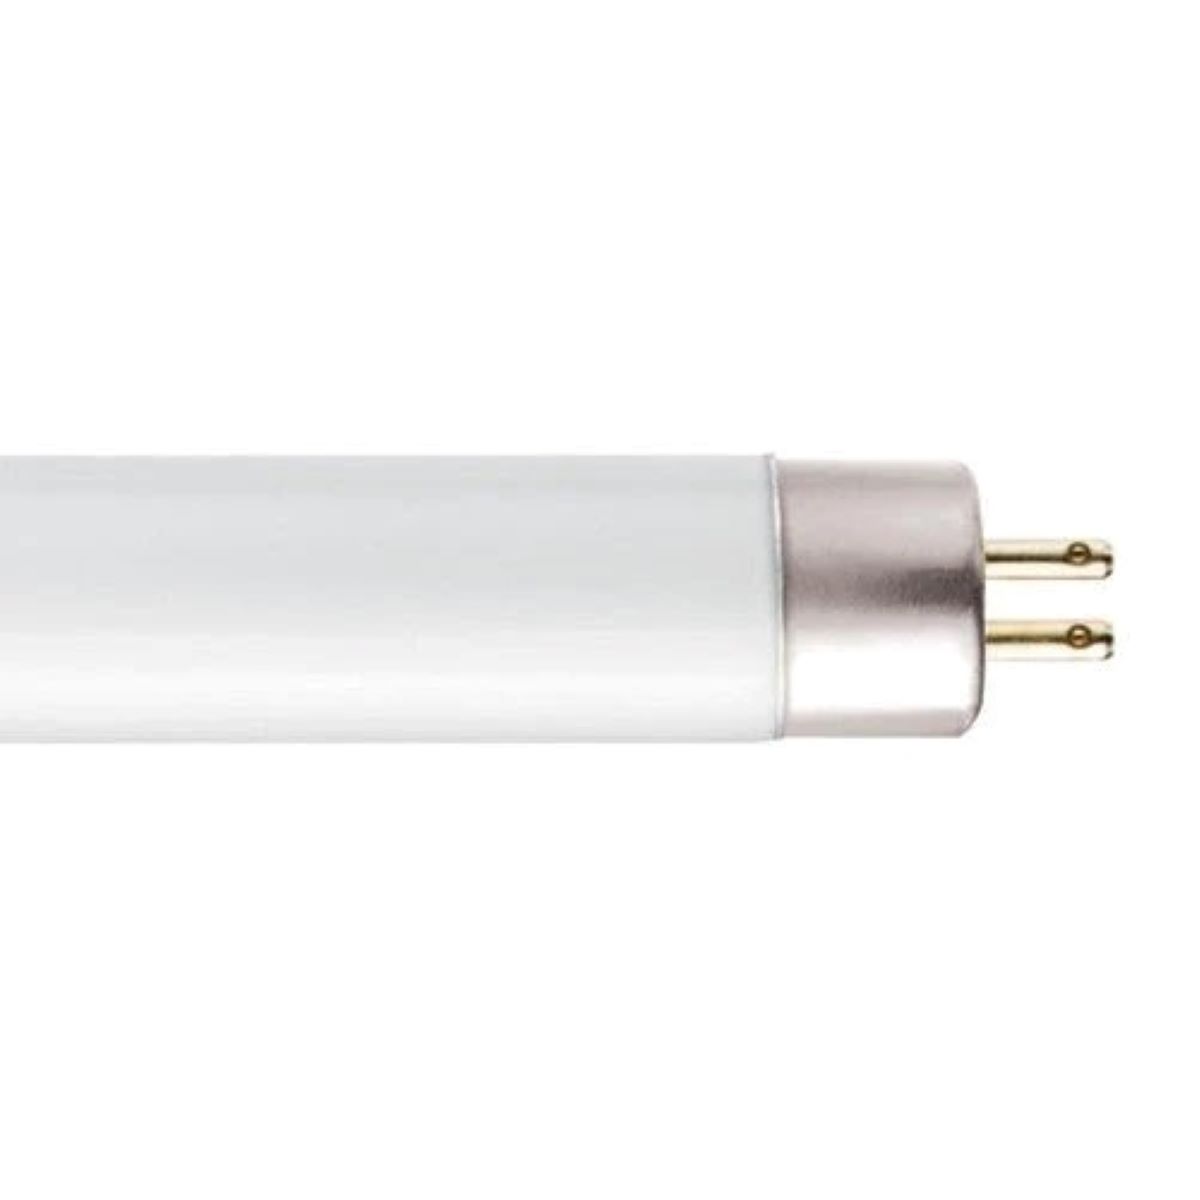 15 Best Ge F13T5/830 Fluorescent Tubes for 2023